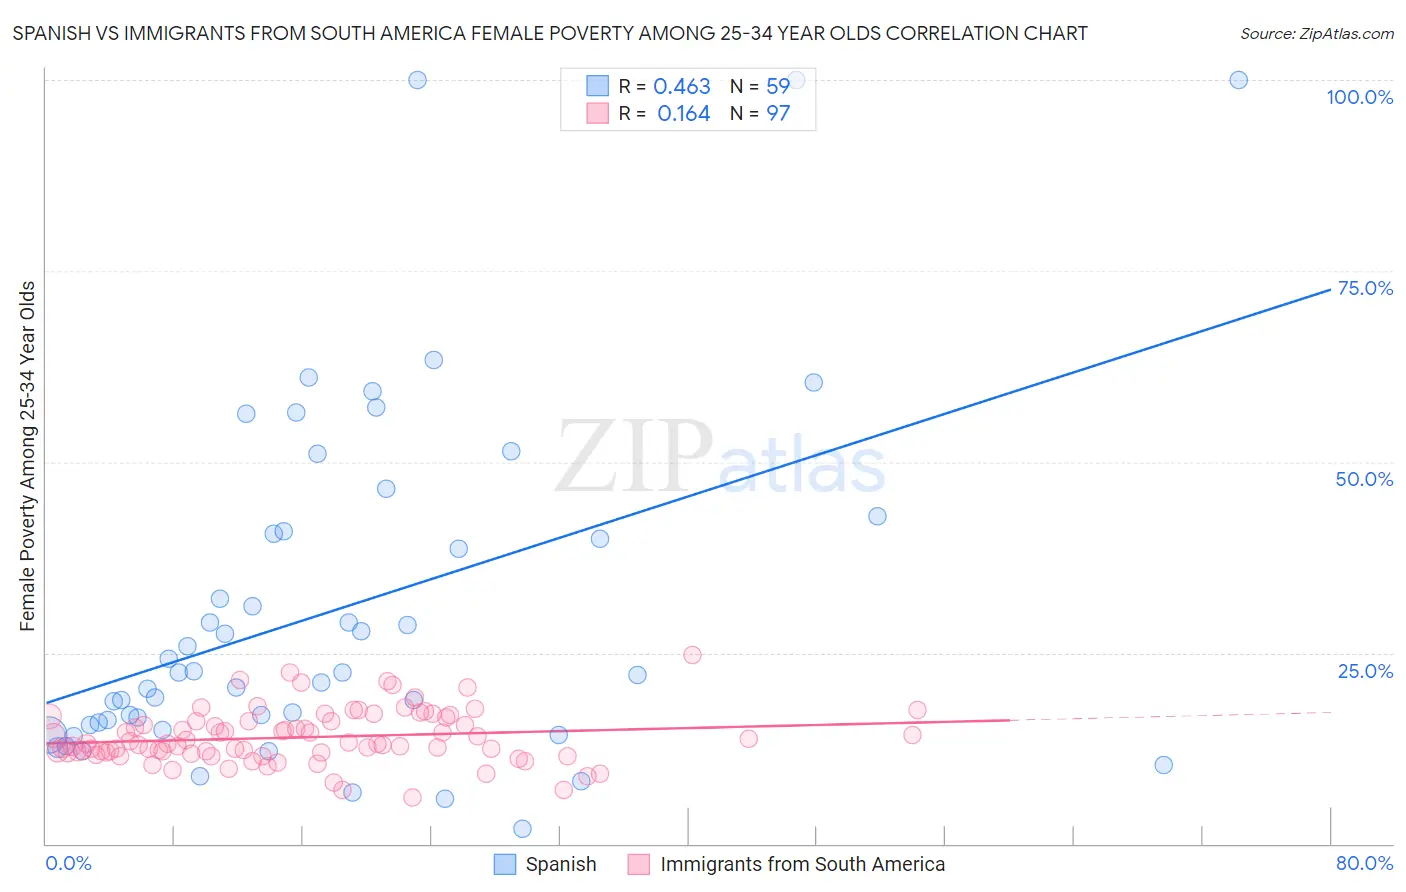 Spanish vs Immigrants from South America Female Poverty Among 25-34 Year Olds